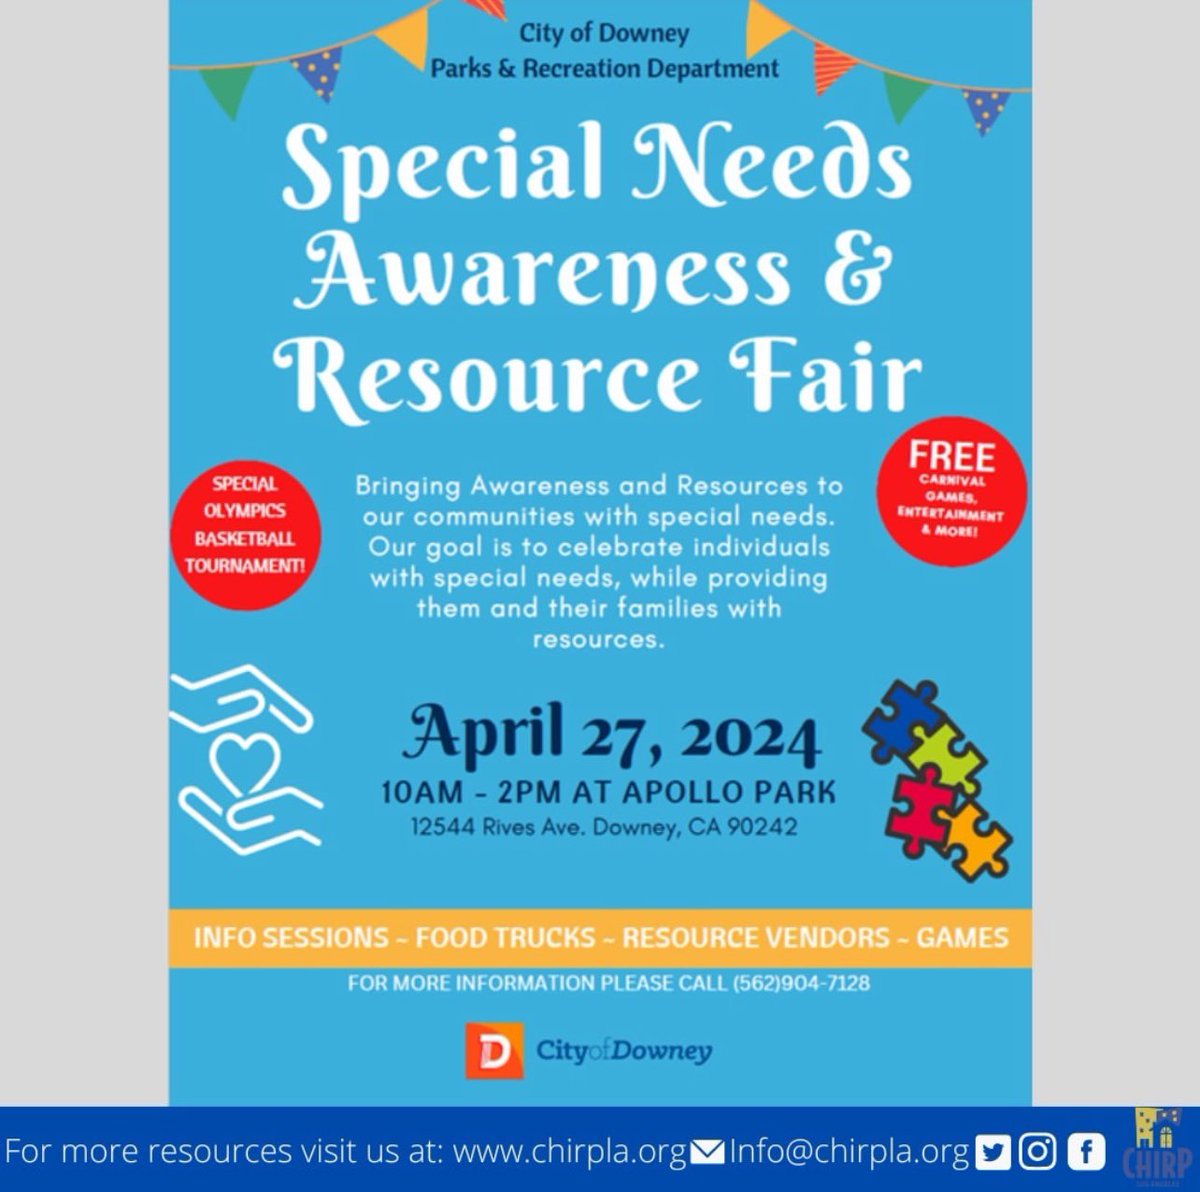 City of Downy is having a Resource Fair for people with disabilities this Saturday! @chirp_la

#resources #resourcefair #peoplewithdisabilities #disabilities #specialneeds #LosAngeles #LACounty